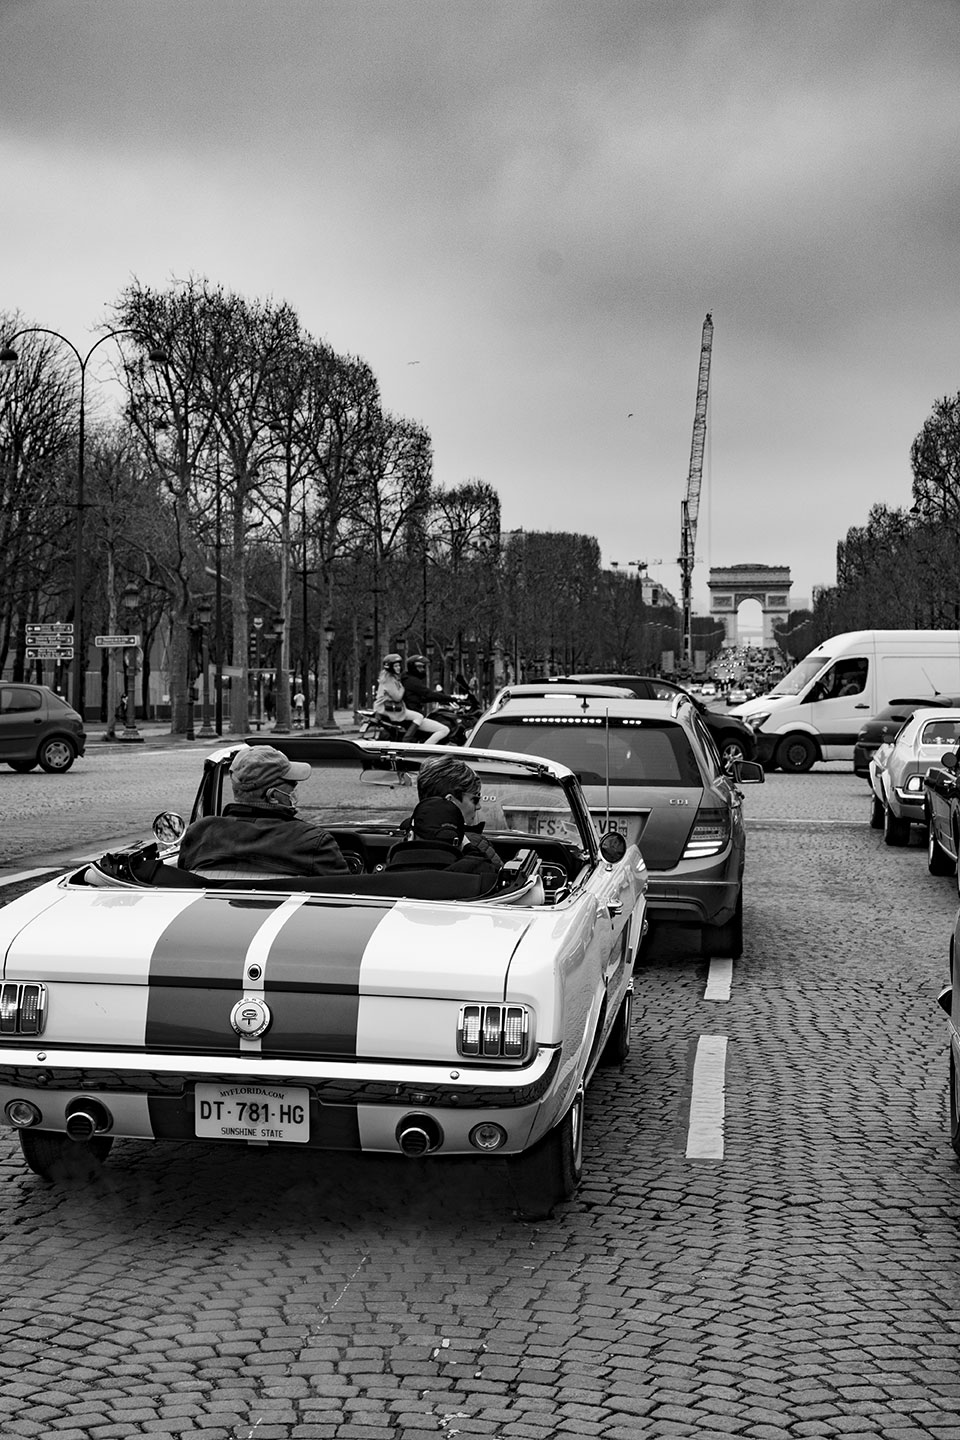 21st Crossing of Paris in Vintage Vehicles, old cars and bikes, January 31, 2021, France, (Nos Dren).